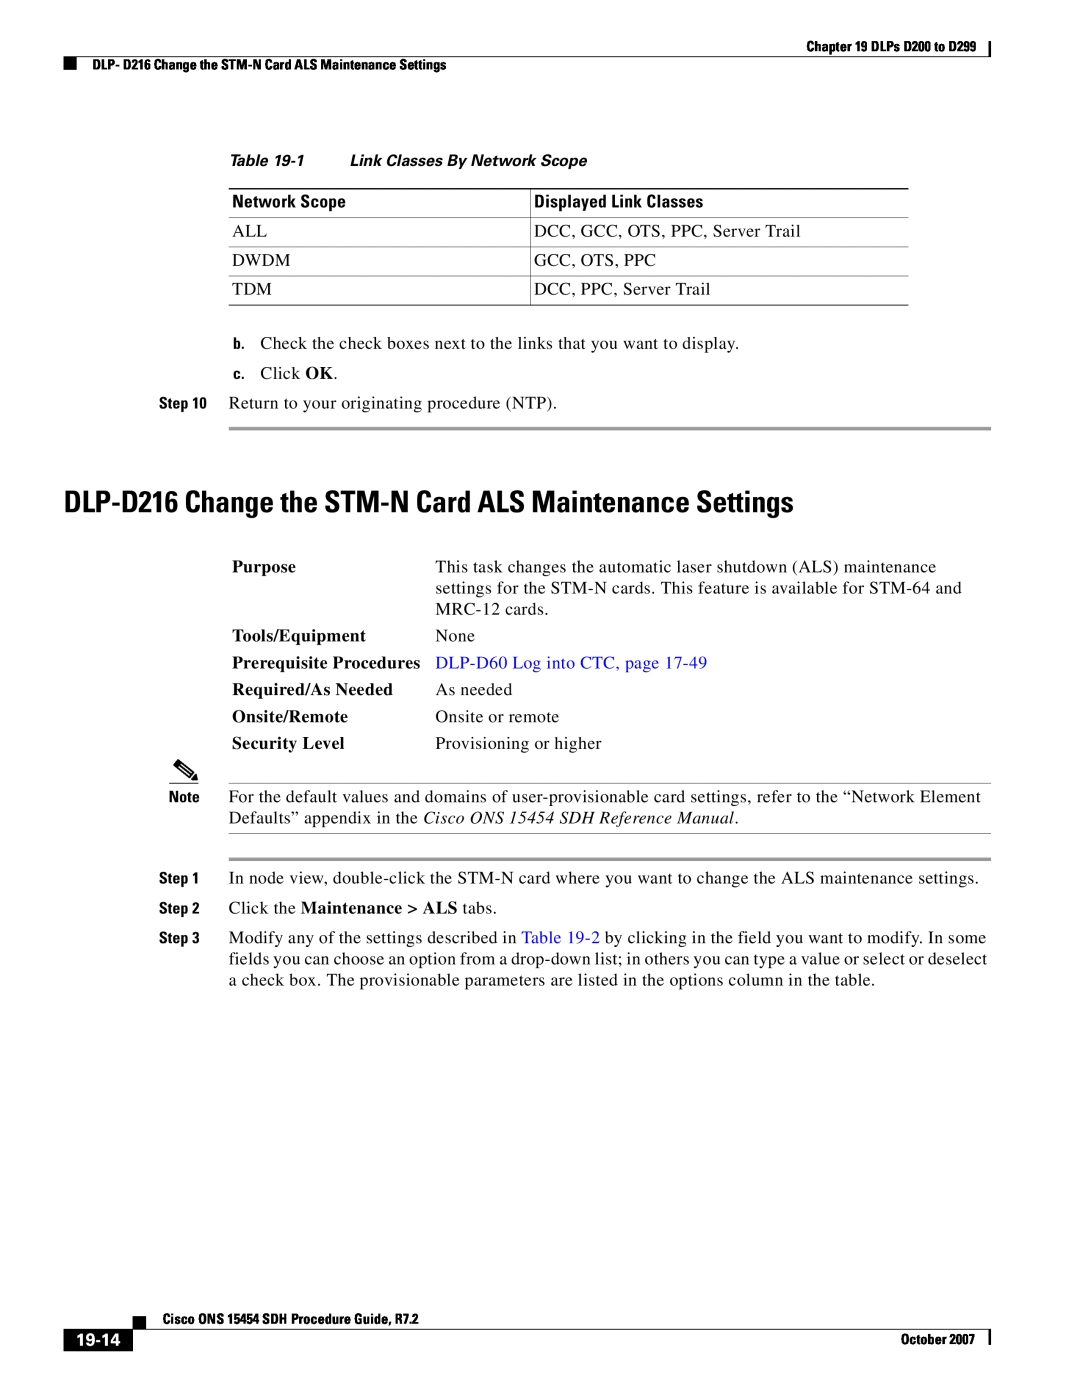 Cisco Systems D200 manual DLP-D216 Change the STM-N Card ALS Maintenance Settings, Displayed Link Classes, 19-14 